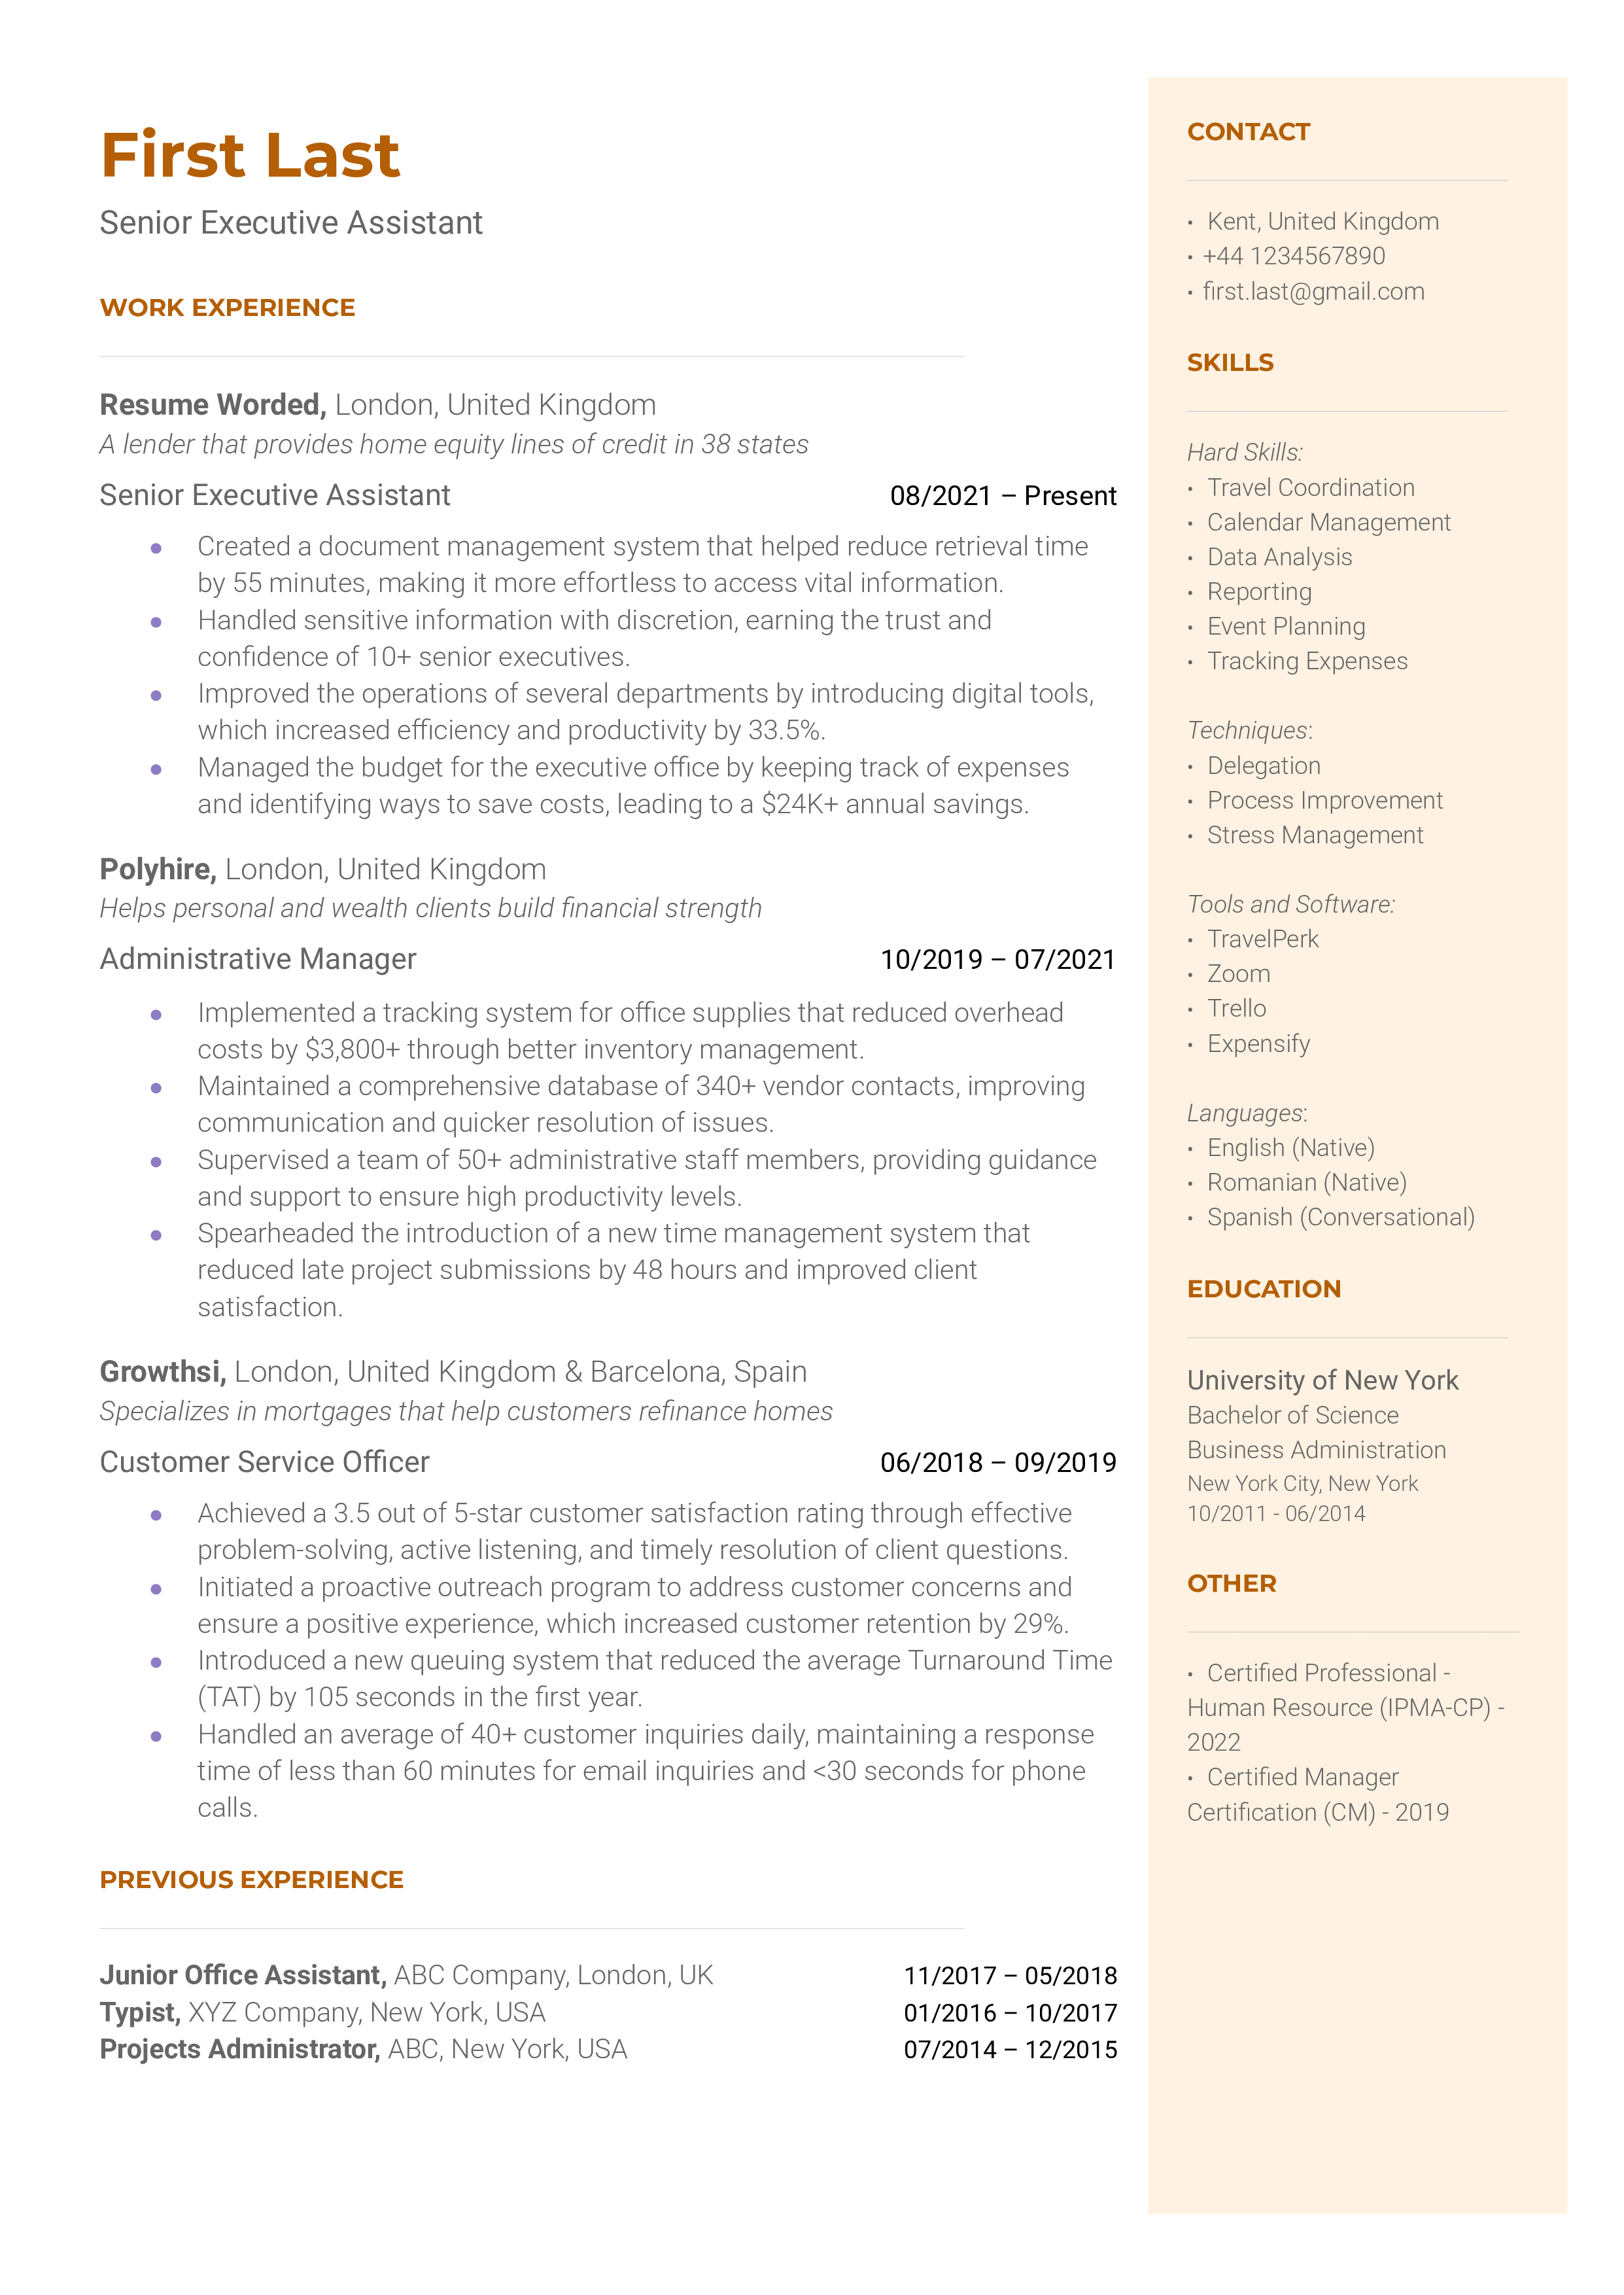 A resume for a Senior Executive Assistant emphasizing tech skills and problem-solving experiences.